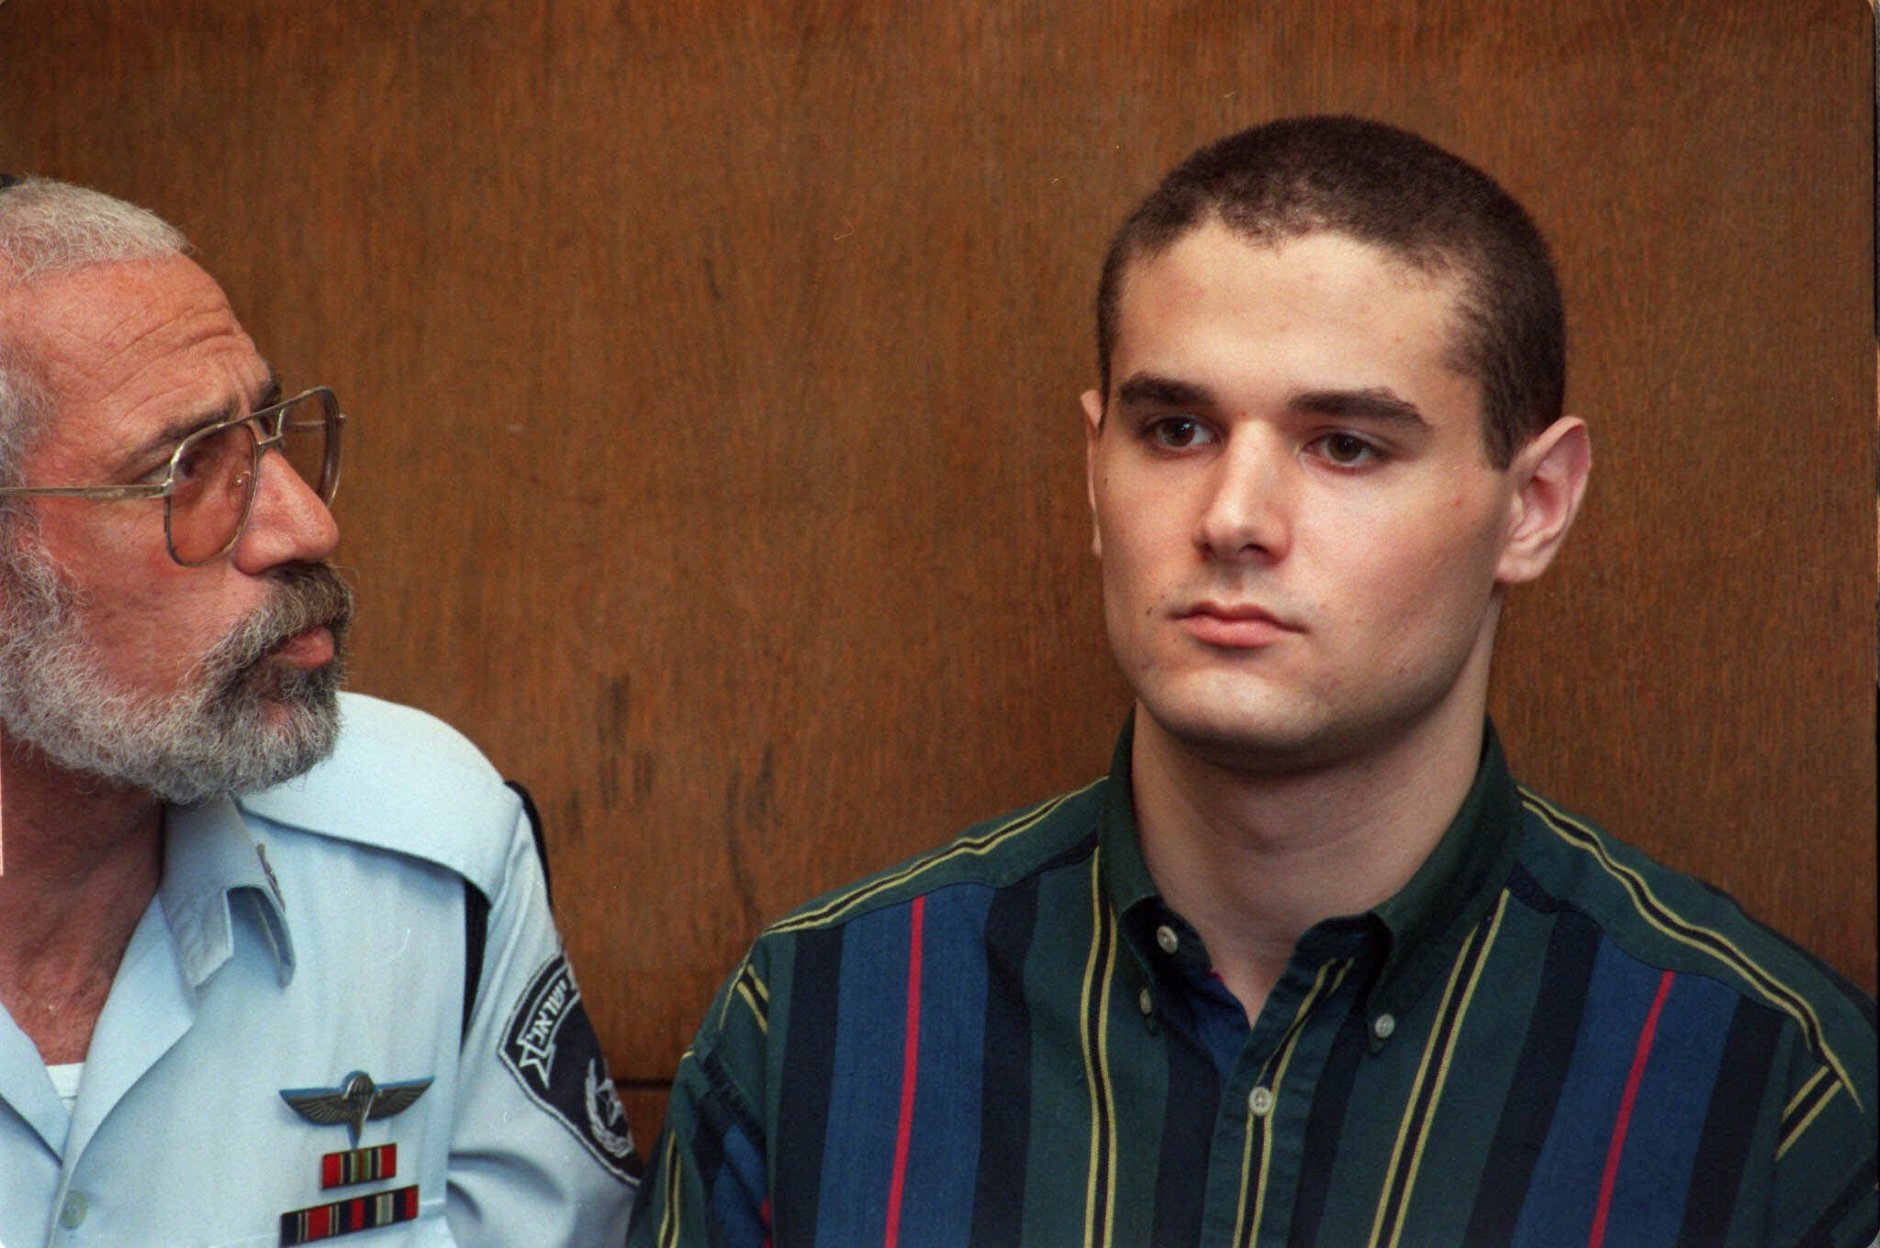 An Israeli police officer looks at Samuel Sheinbein at the Tel Aviv court Thursday, Sept. 2, 1999.  The Maryland teen-ager admitted in an Israeli court Thursday that he strangled an acquaintance in 1997, part of a plea bargain under which he will serve 24 years in an Israeli prison.   (AP Photo/Eyal Warshavsky)